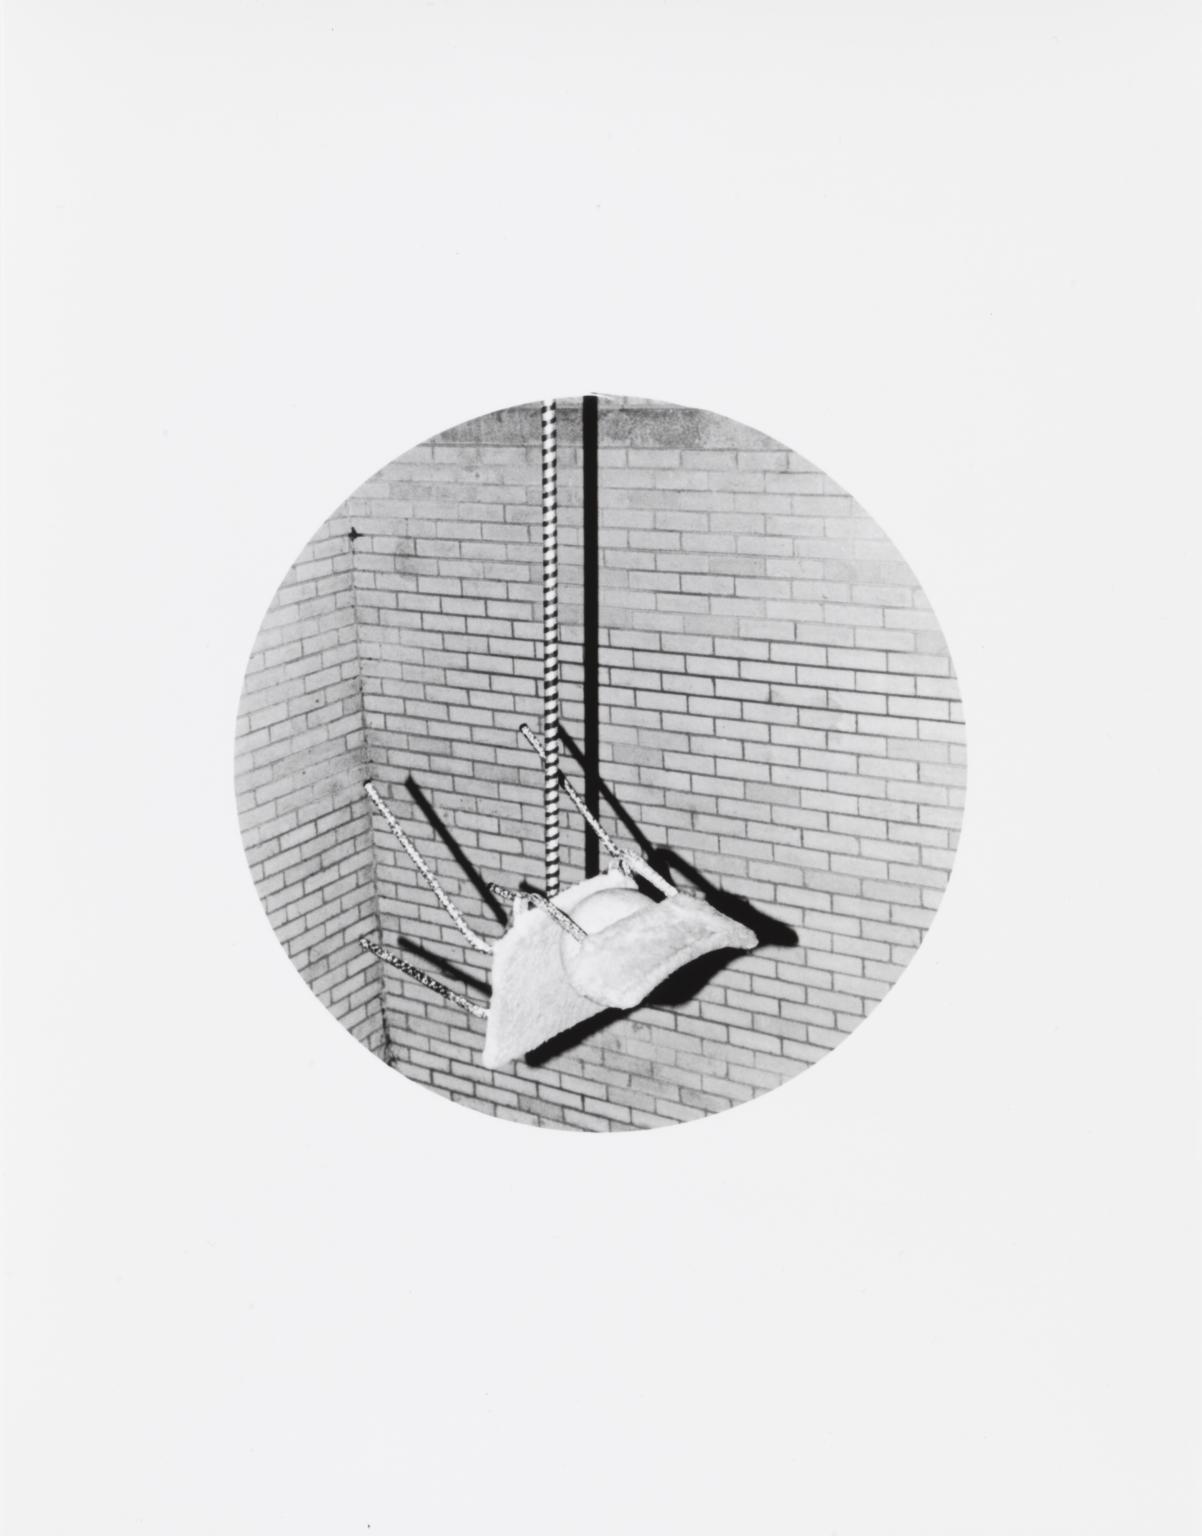 P13226: Untitled (Chair balancing on stick)